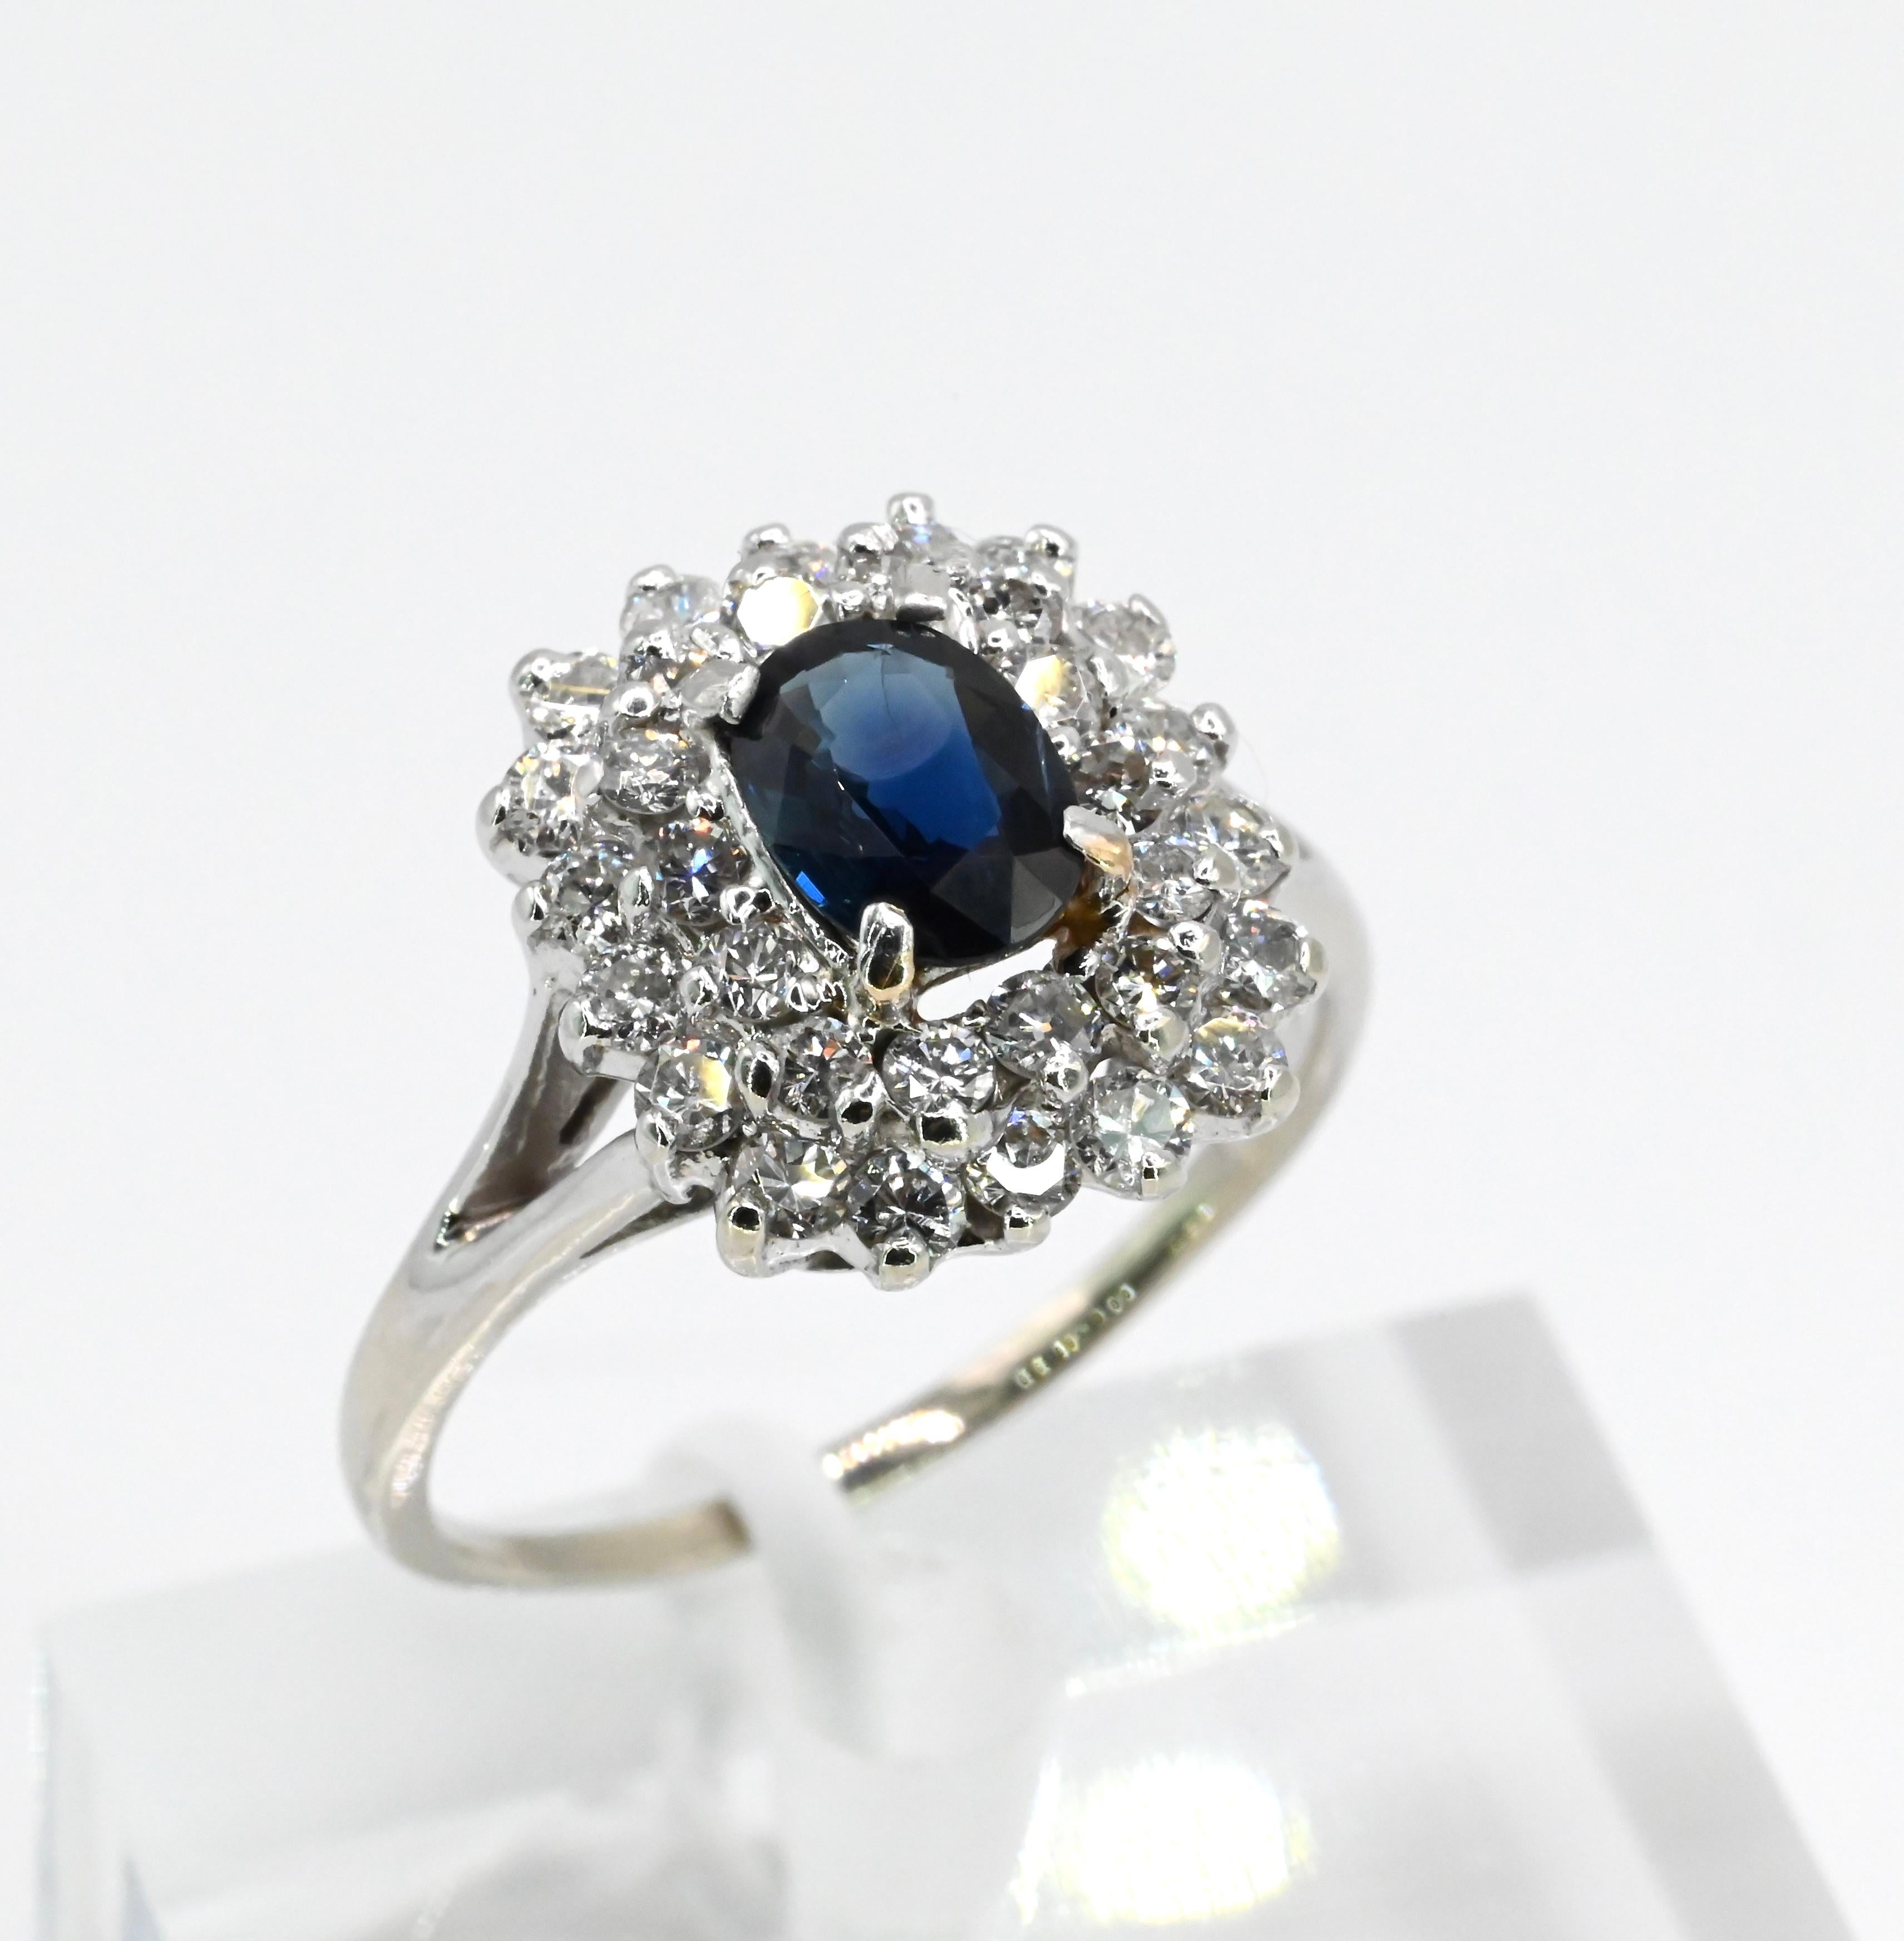 Gorgeous Colorful Deep Blue Sapphire & Diamond 
Ring 14K White Gold 
7 1/2 Size USA 

There are 32 diamond accent stones that are .04 carat each VS Clarity FG color

Sapphire dimensions 
7.07 mm x 5.36 mm x 2.70 mm sapphire Approx 1 carat

3 grams